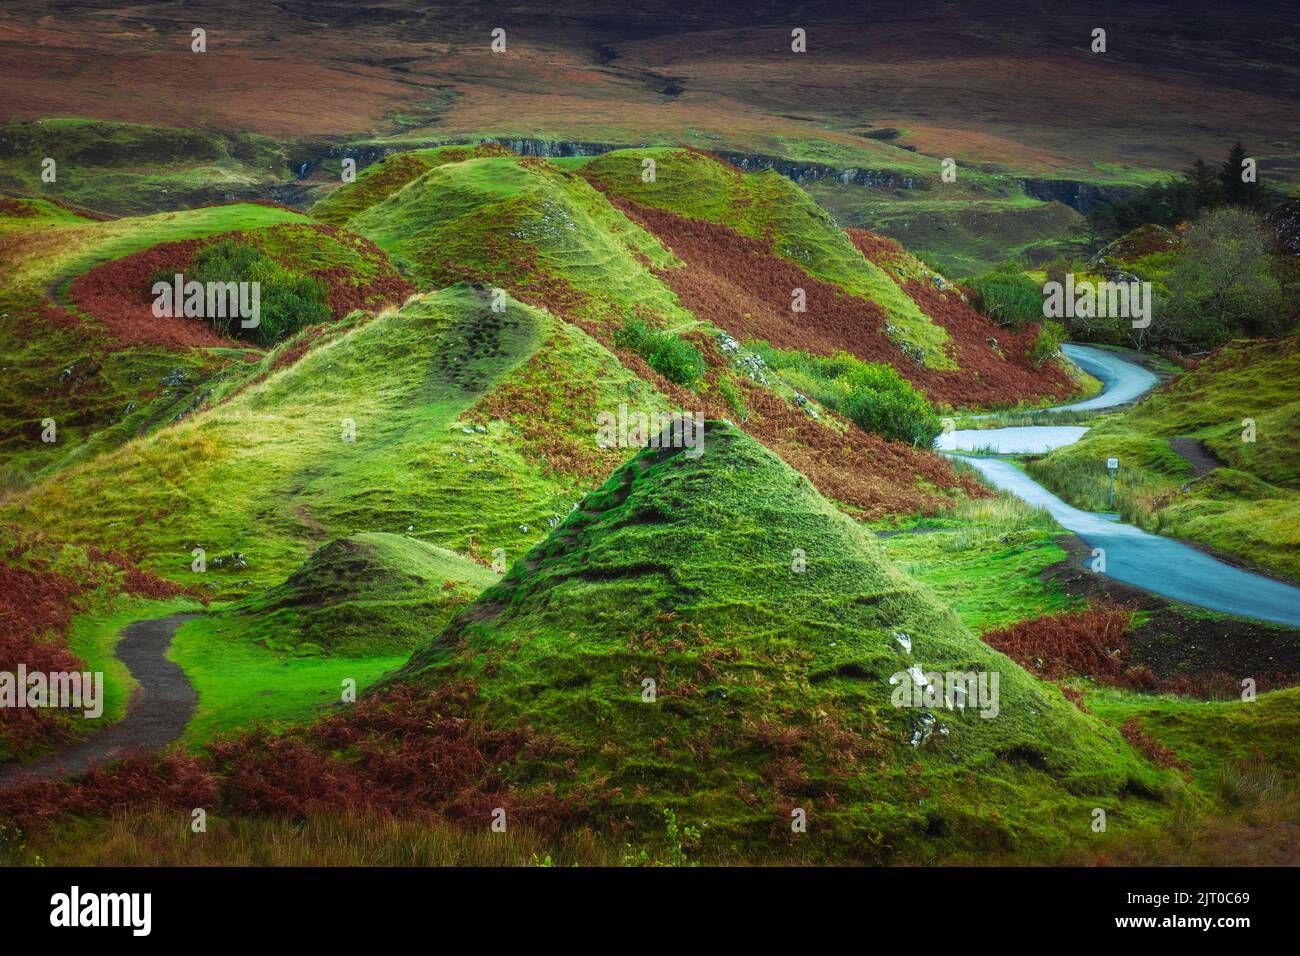 Fairy Glen on Isle of Skye, Scotland.Beautiful landscape scenery with green hills and some red ferns in the autumn. Stock Photo